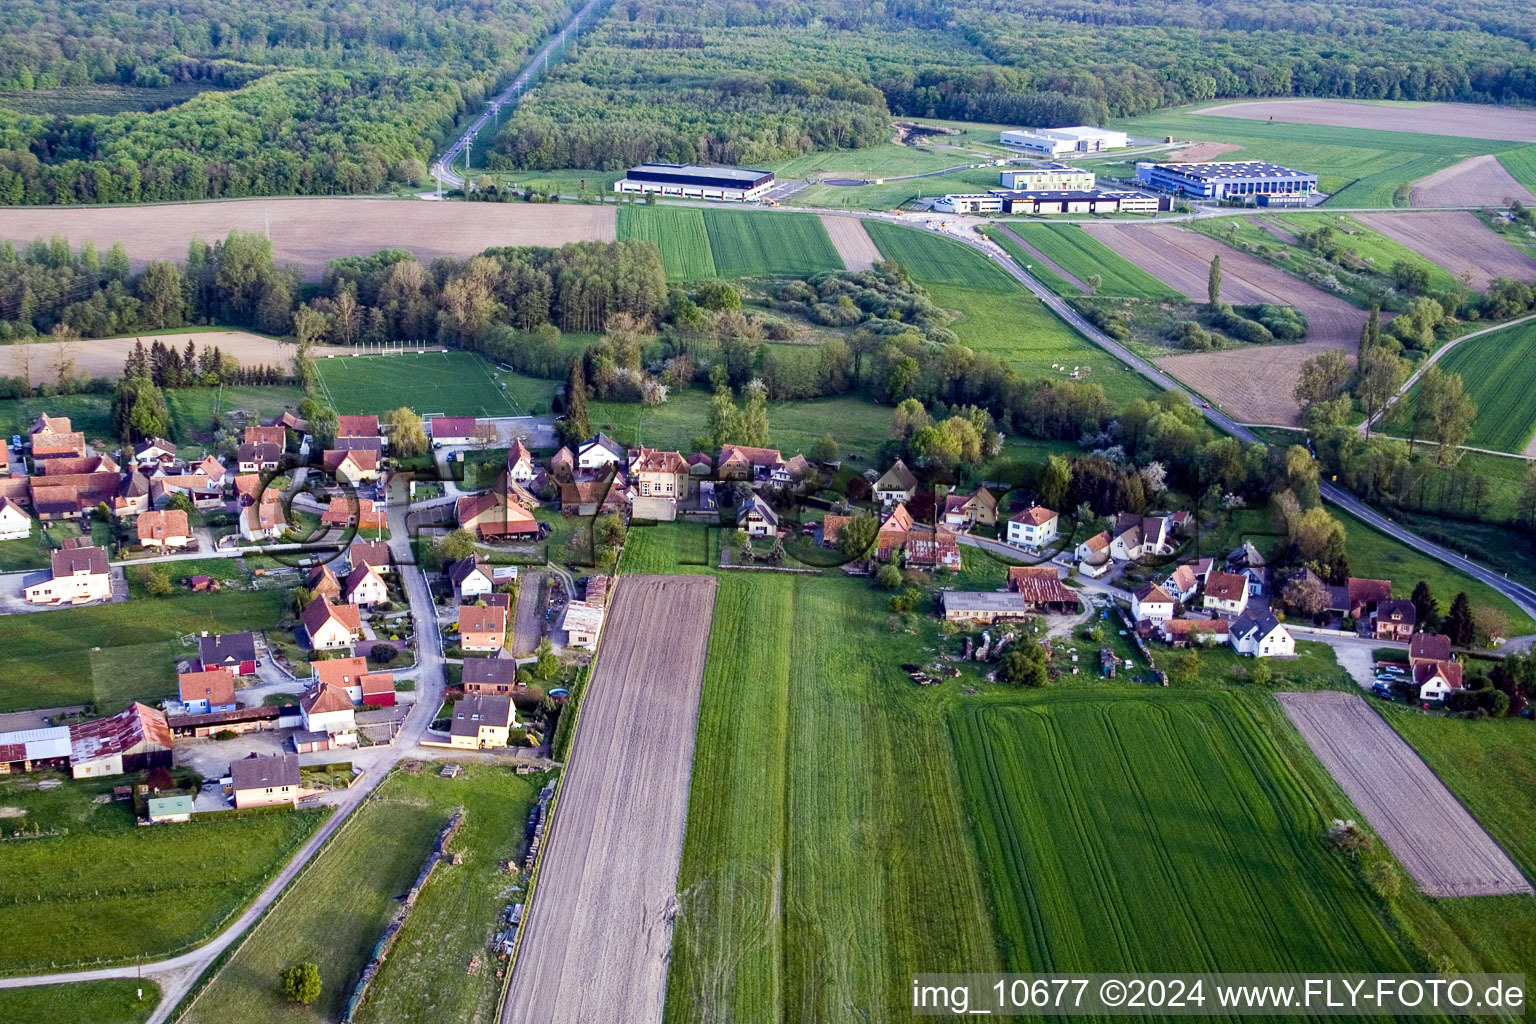 Village - view on the edge of agricultural fields and farmland in the district Hinterfeld in Walbourg in Grand Est, France